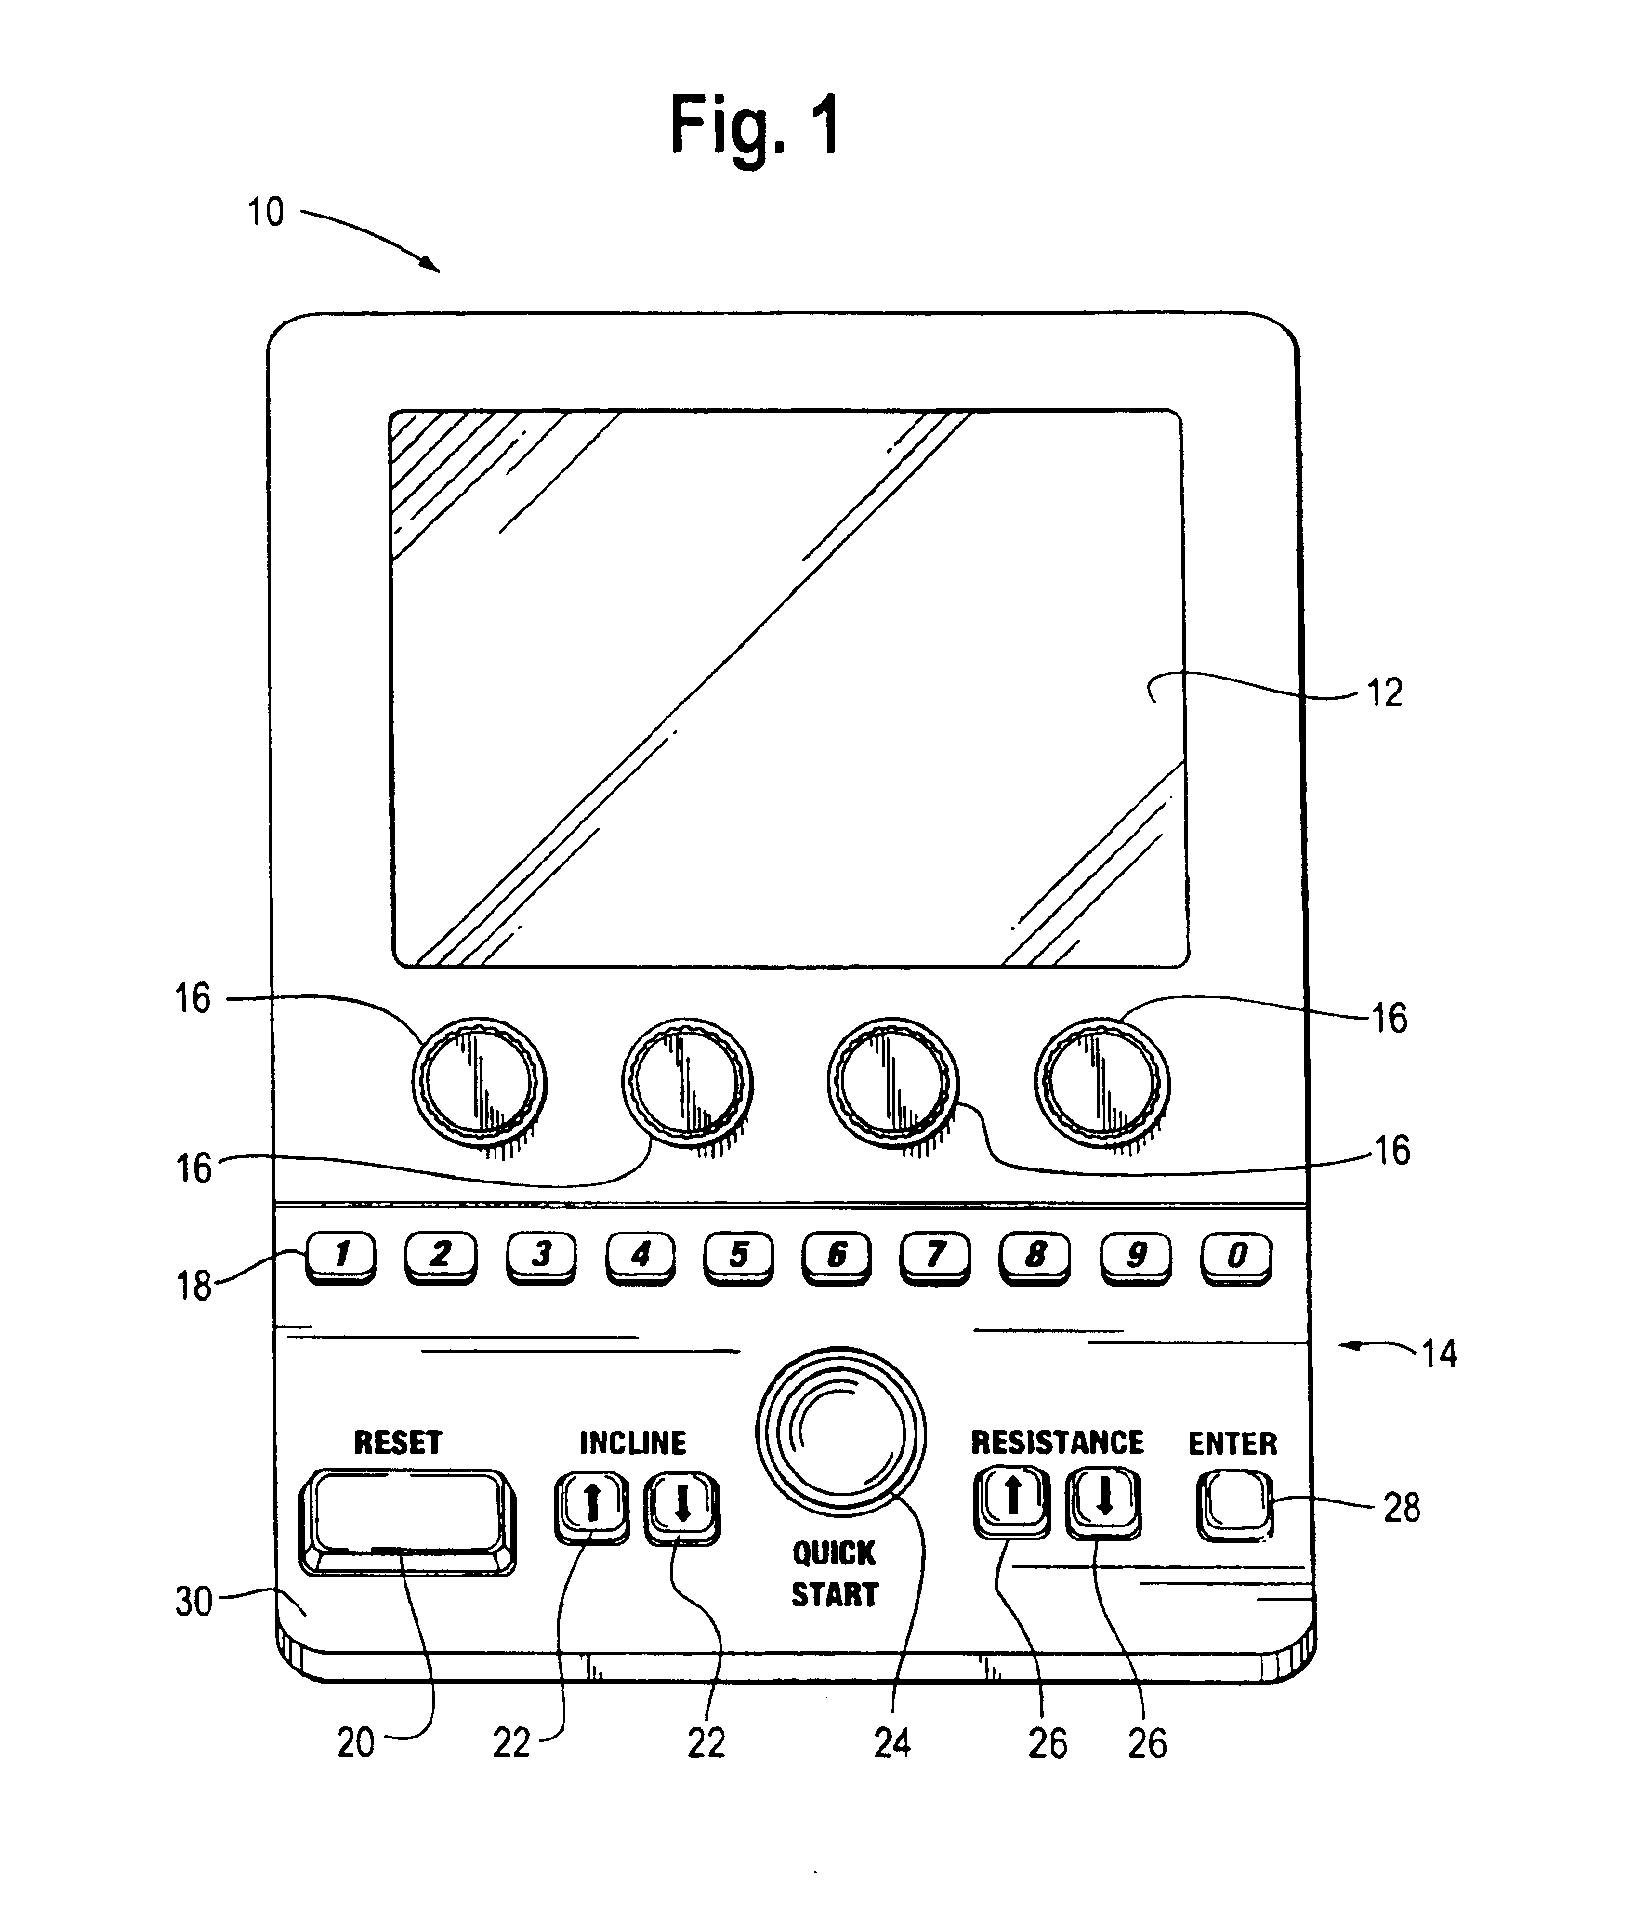 Control system input apparatus and method